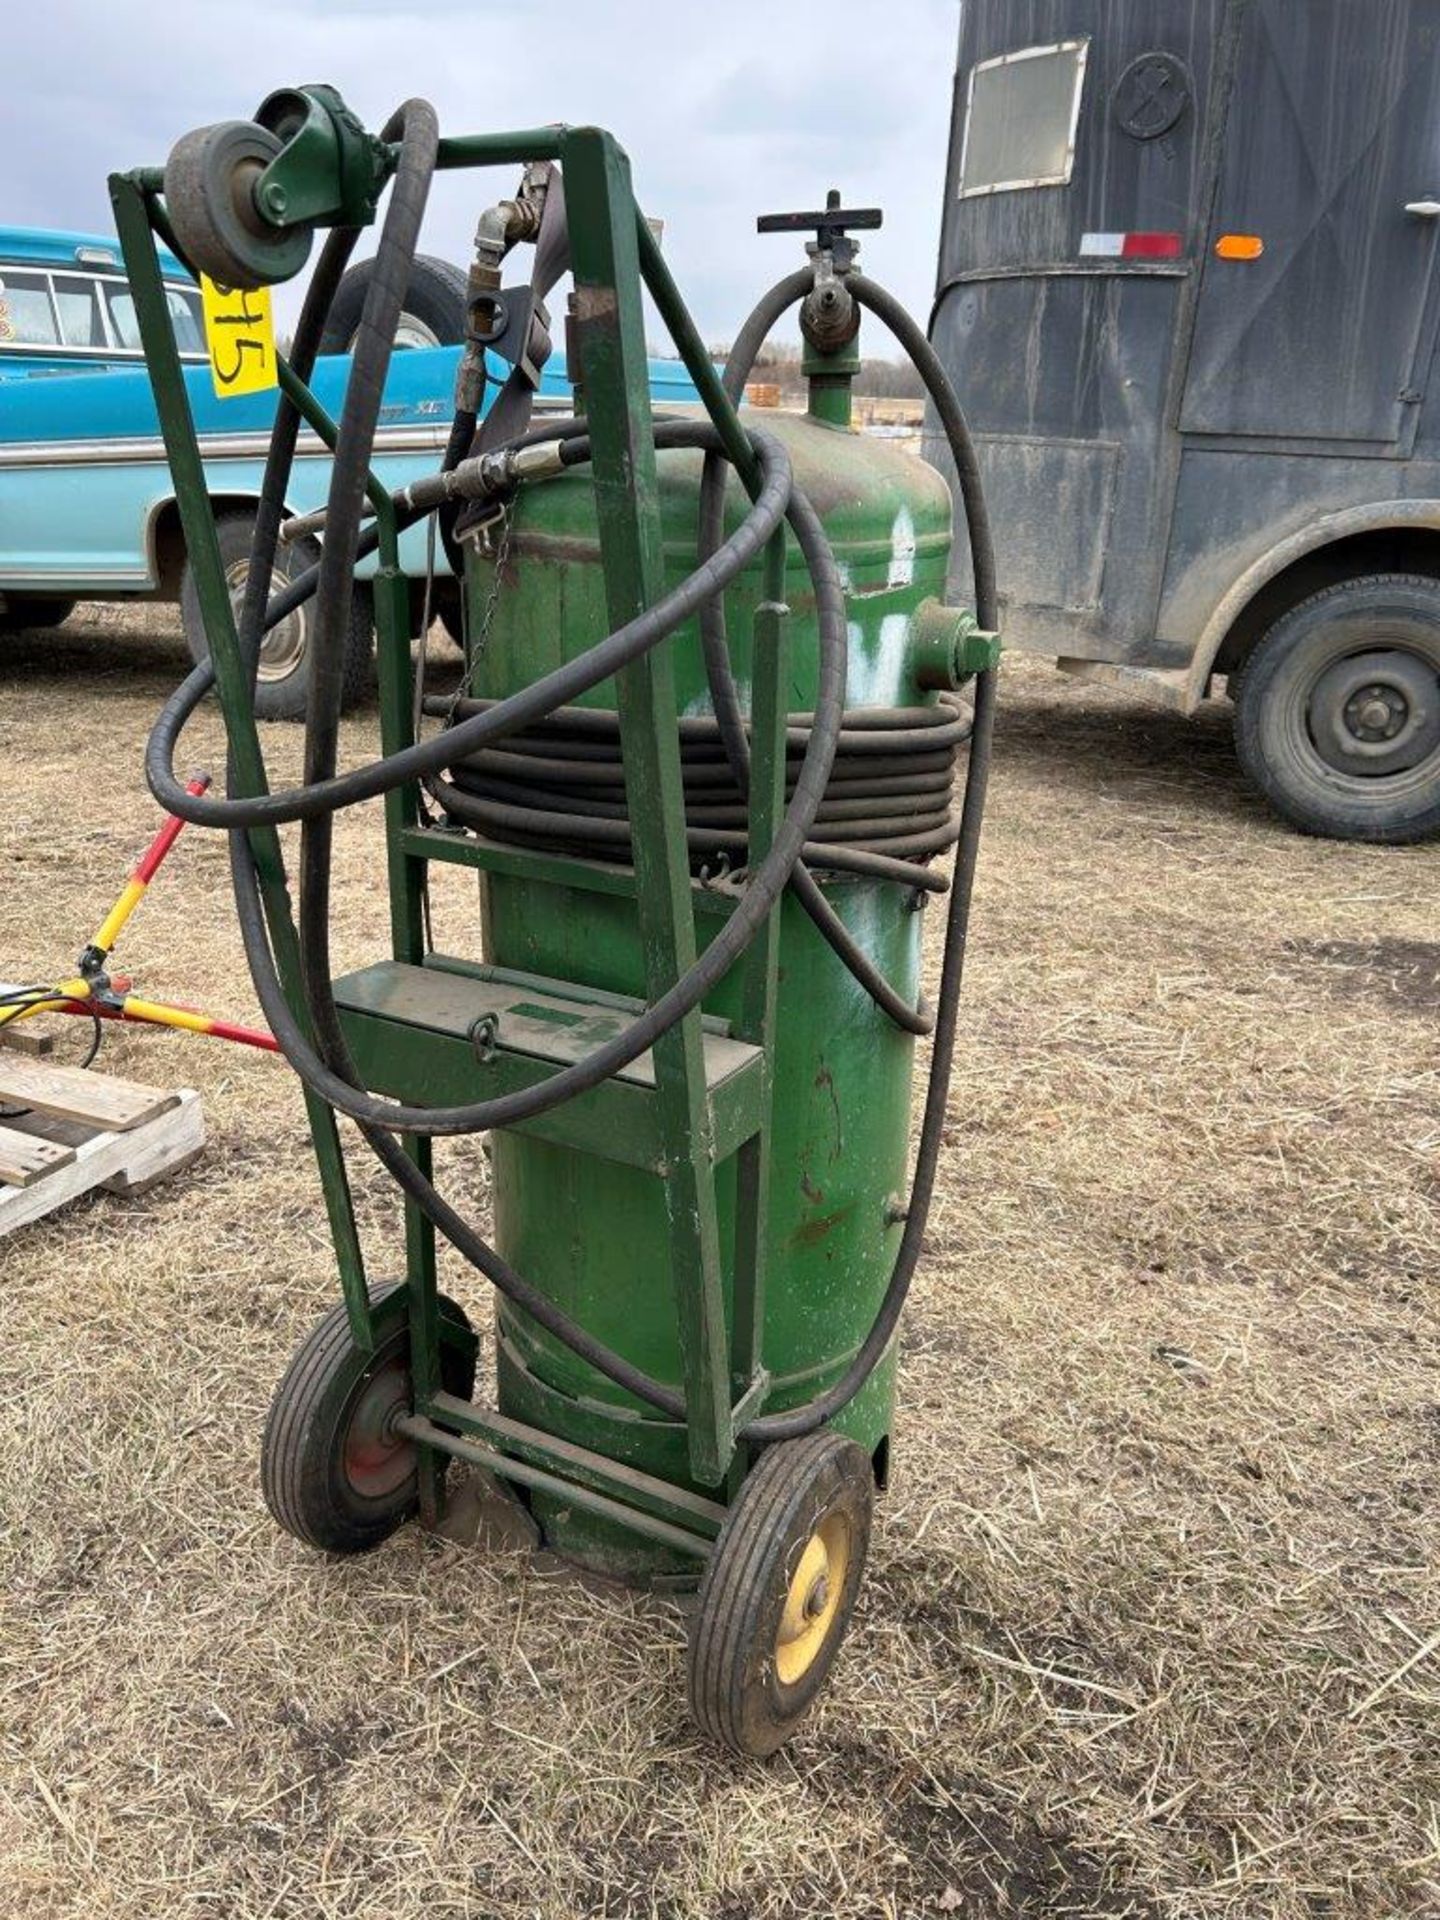 LARGE COMPRESSED AIR TANK ON WHEELED CART W/AIRLINE